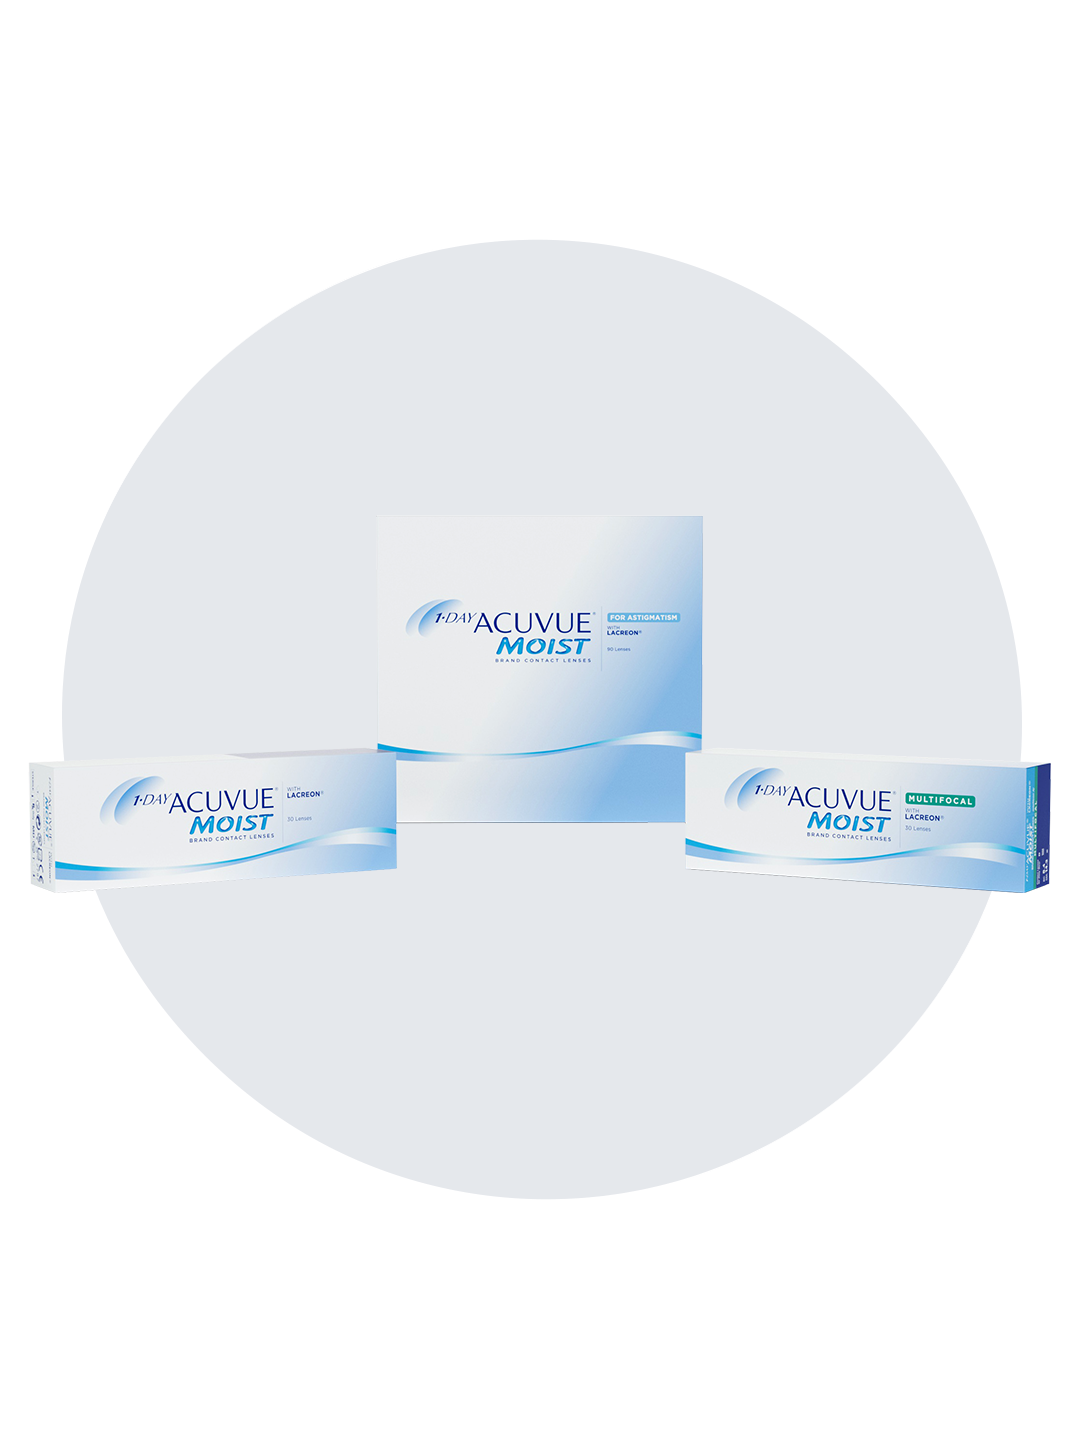 Boxes of the Moist family of contact lenses, a popular brand known for its exceptional comfort and visual clarity 